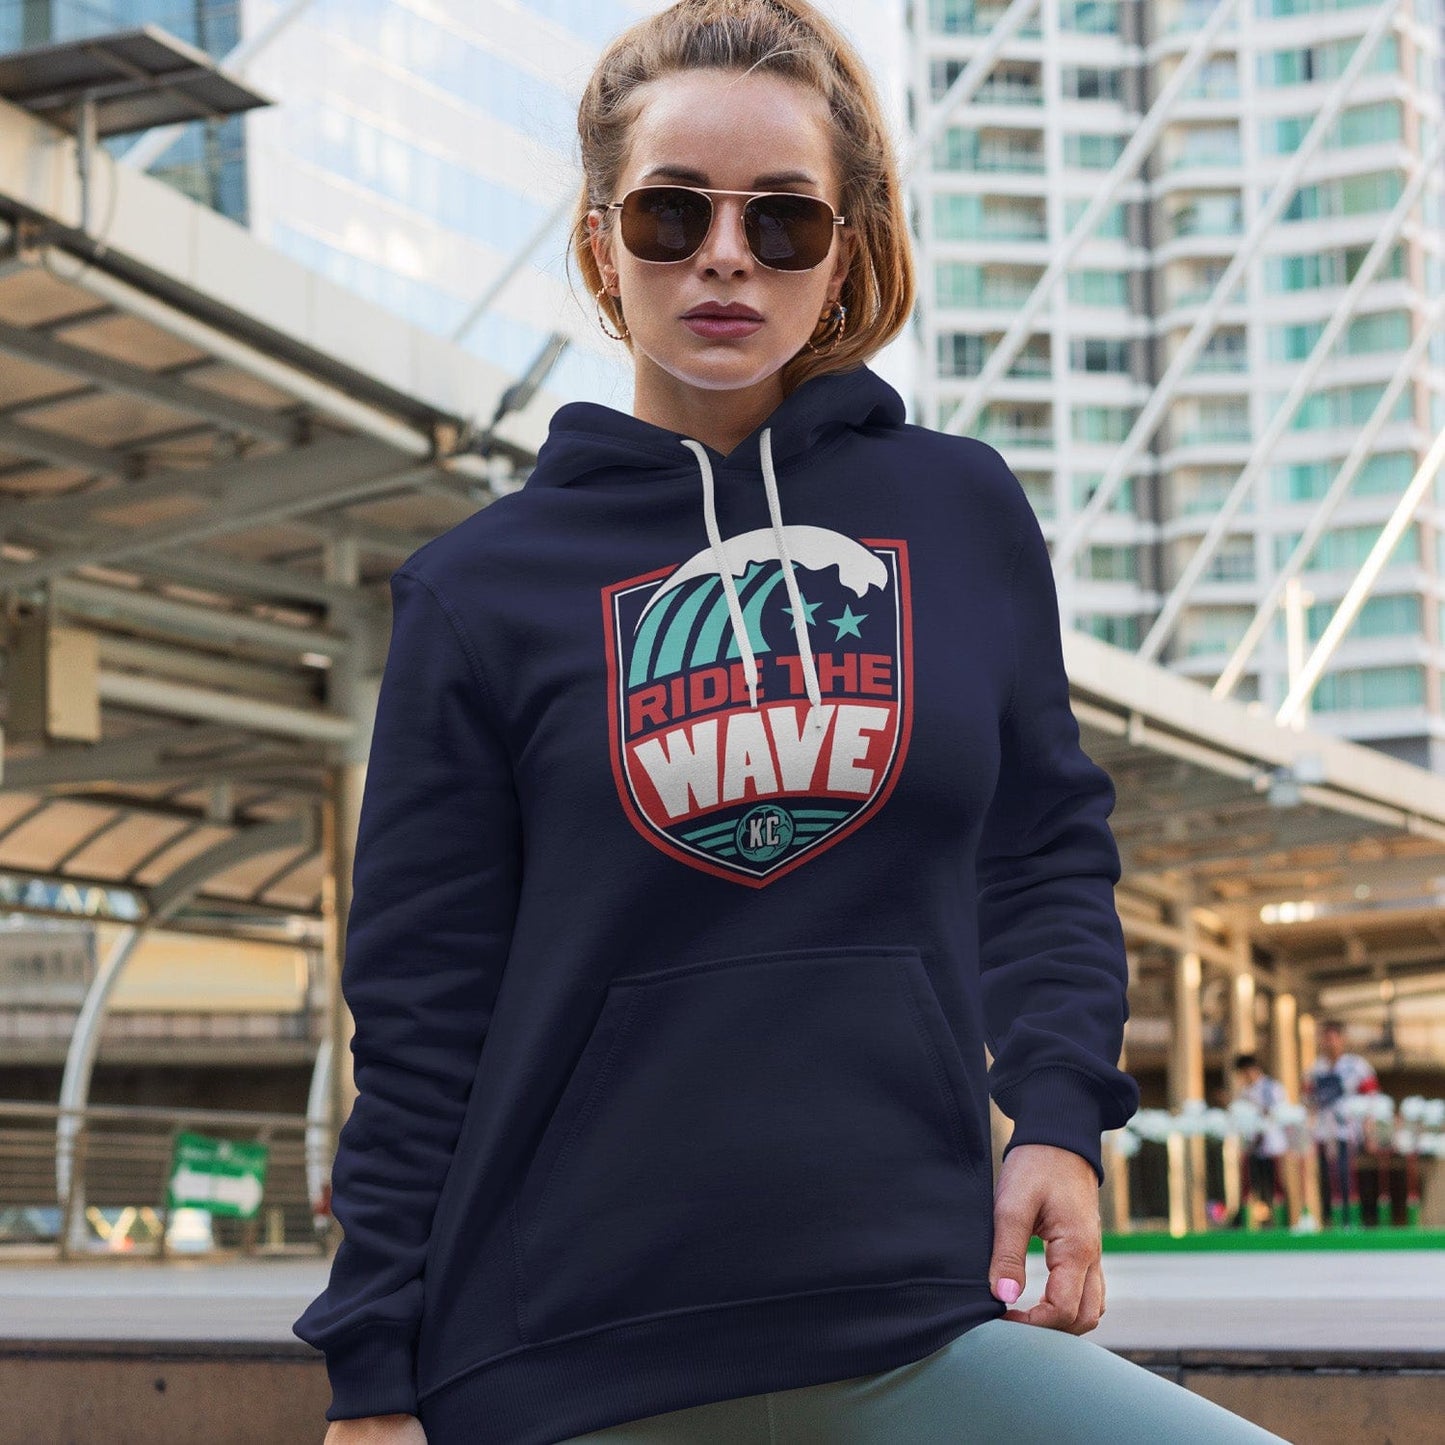 KC Swag Kansas City Current RIDE THE WAVE on navy fleece pullover hoodie worn by female model standing in front of downtown transit station